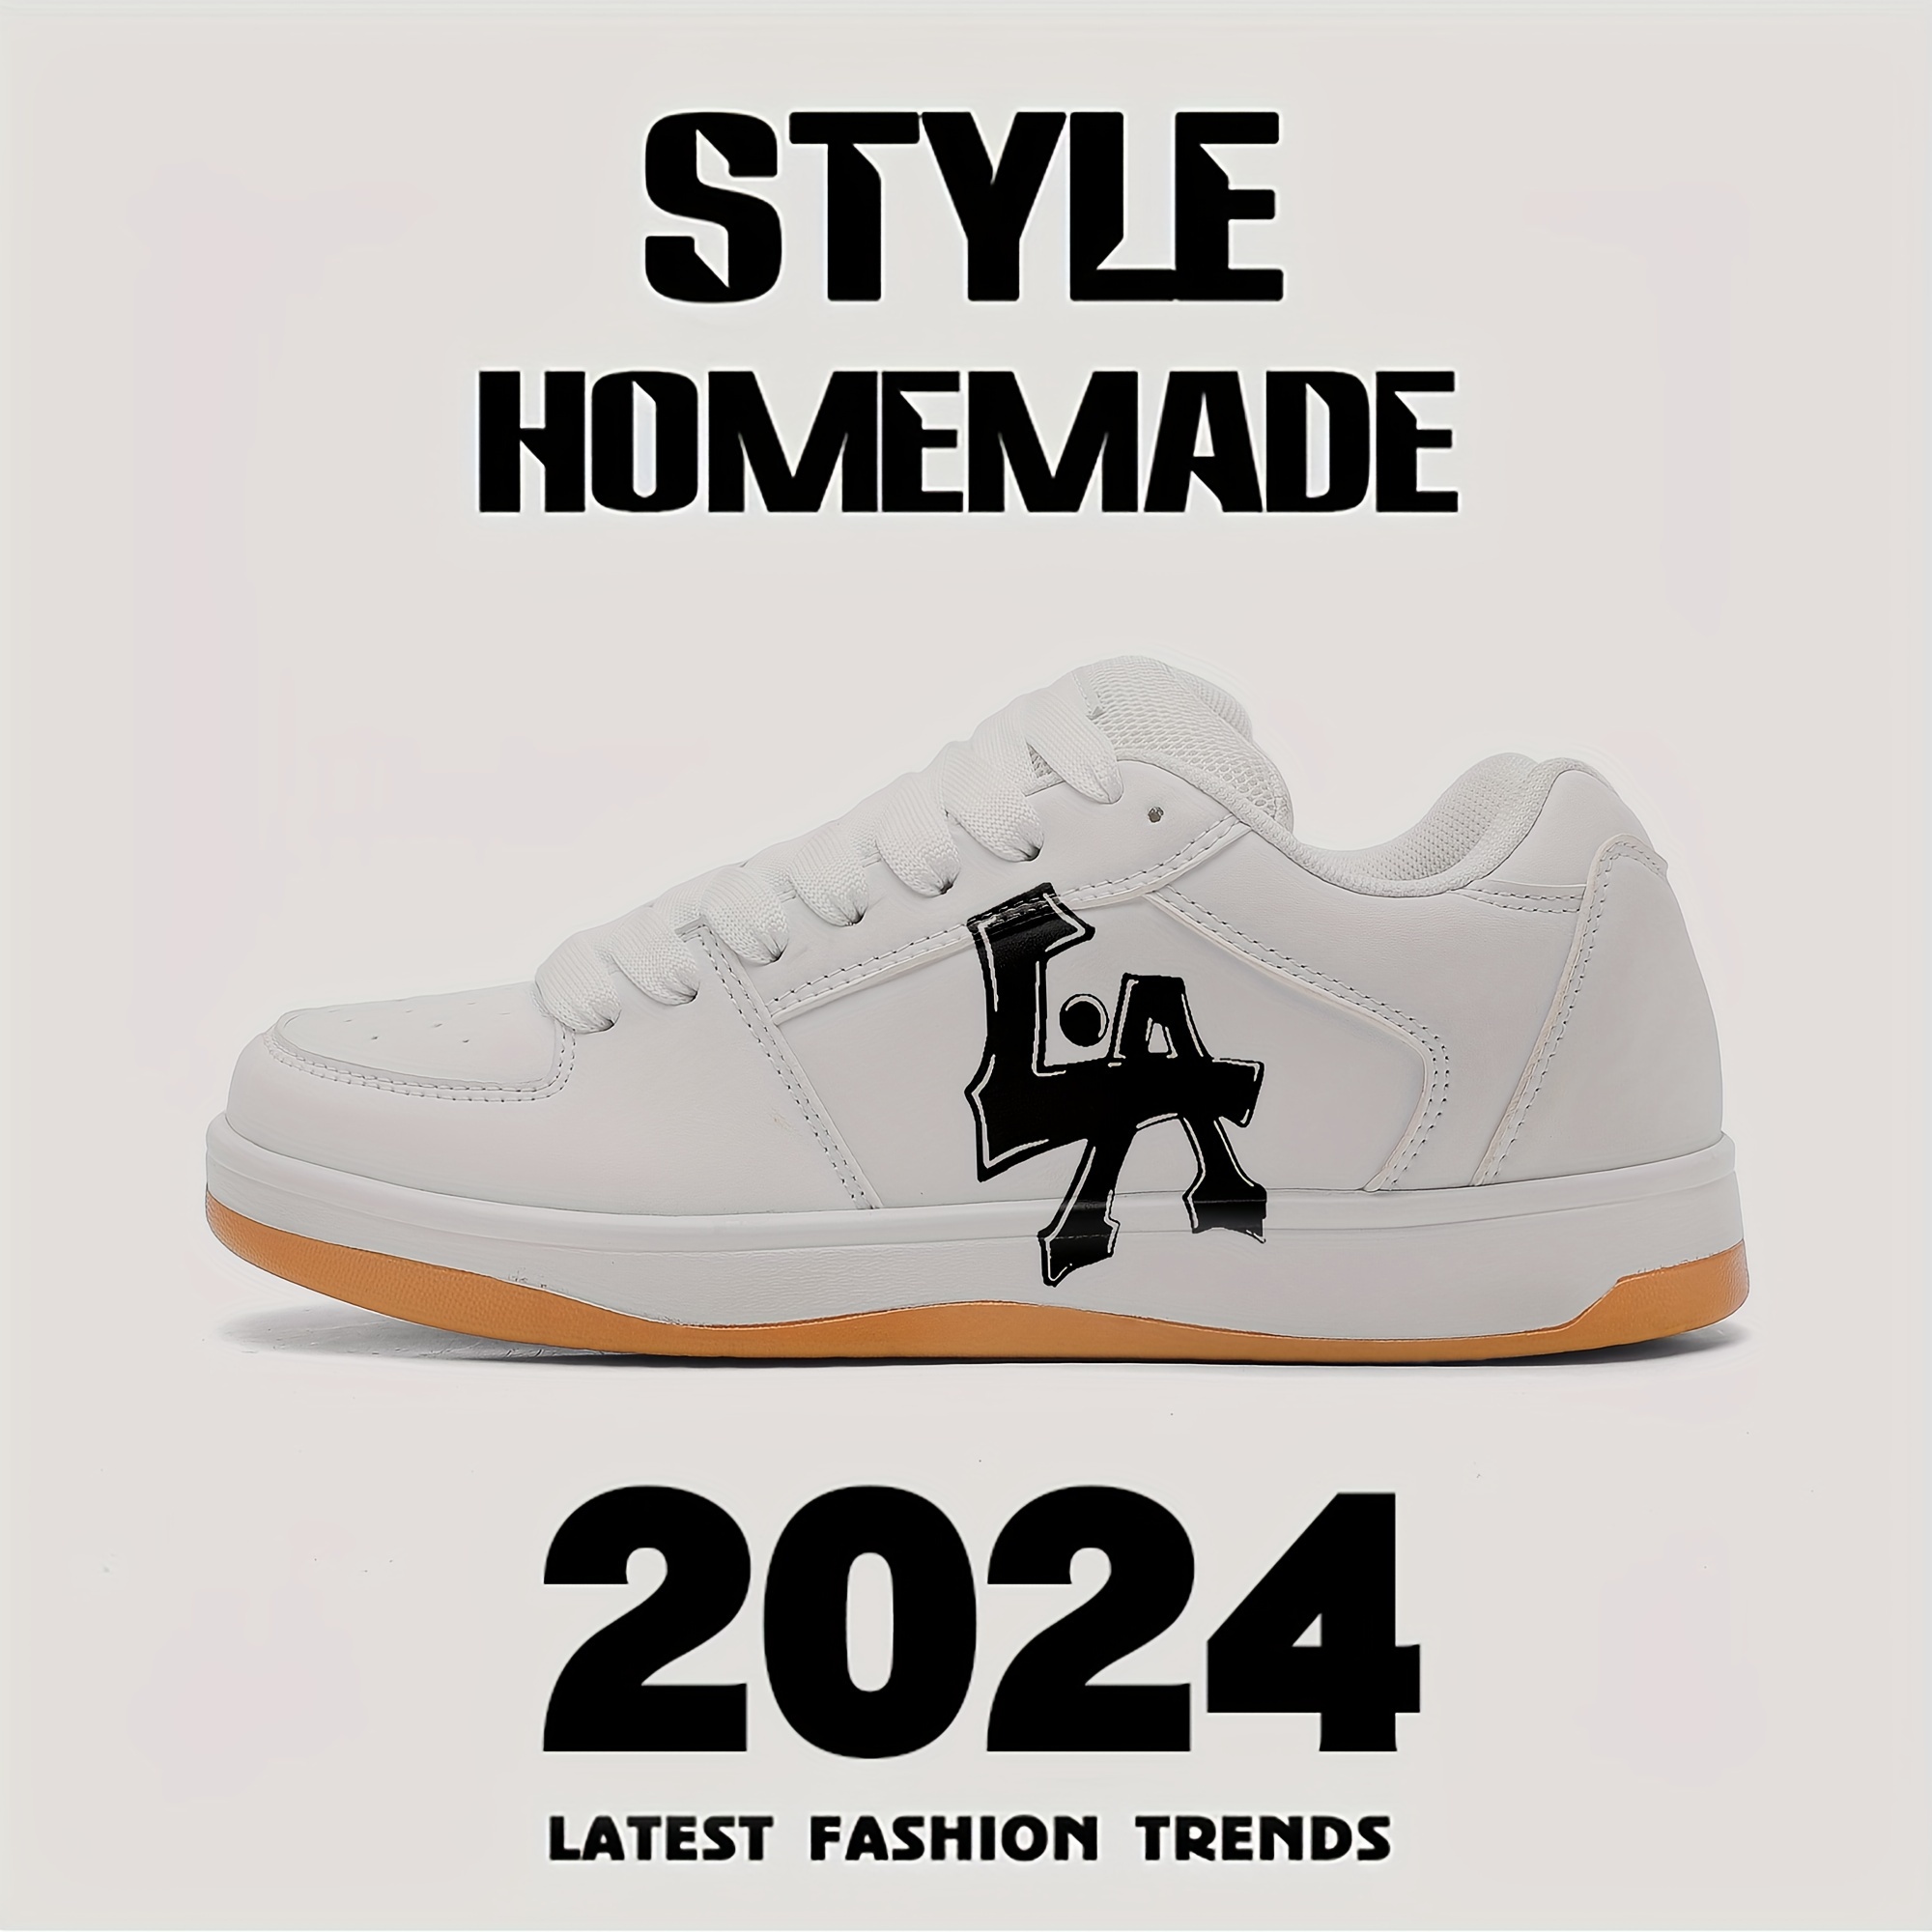 

La Logo Low Top Sneakers - Men's Casual Summer Shoes - Pu Leather, Rubber Sole, Lace-up Closure - Suitable For All Day Wear